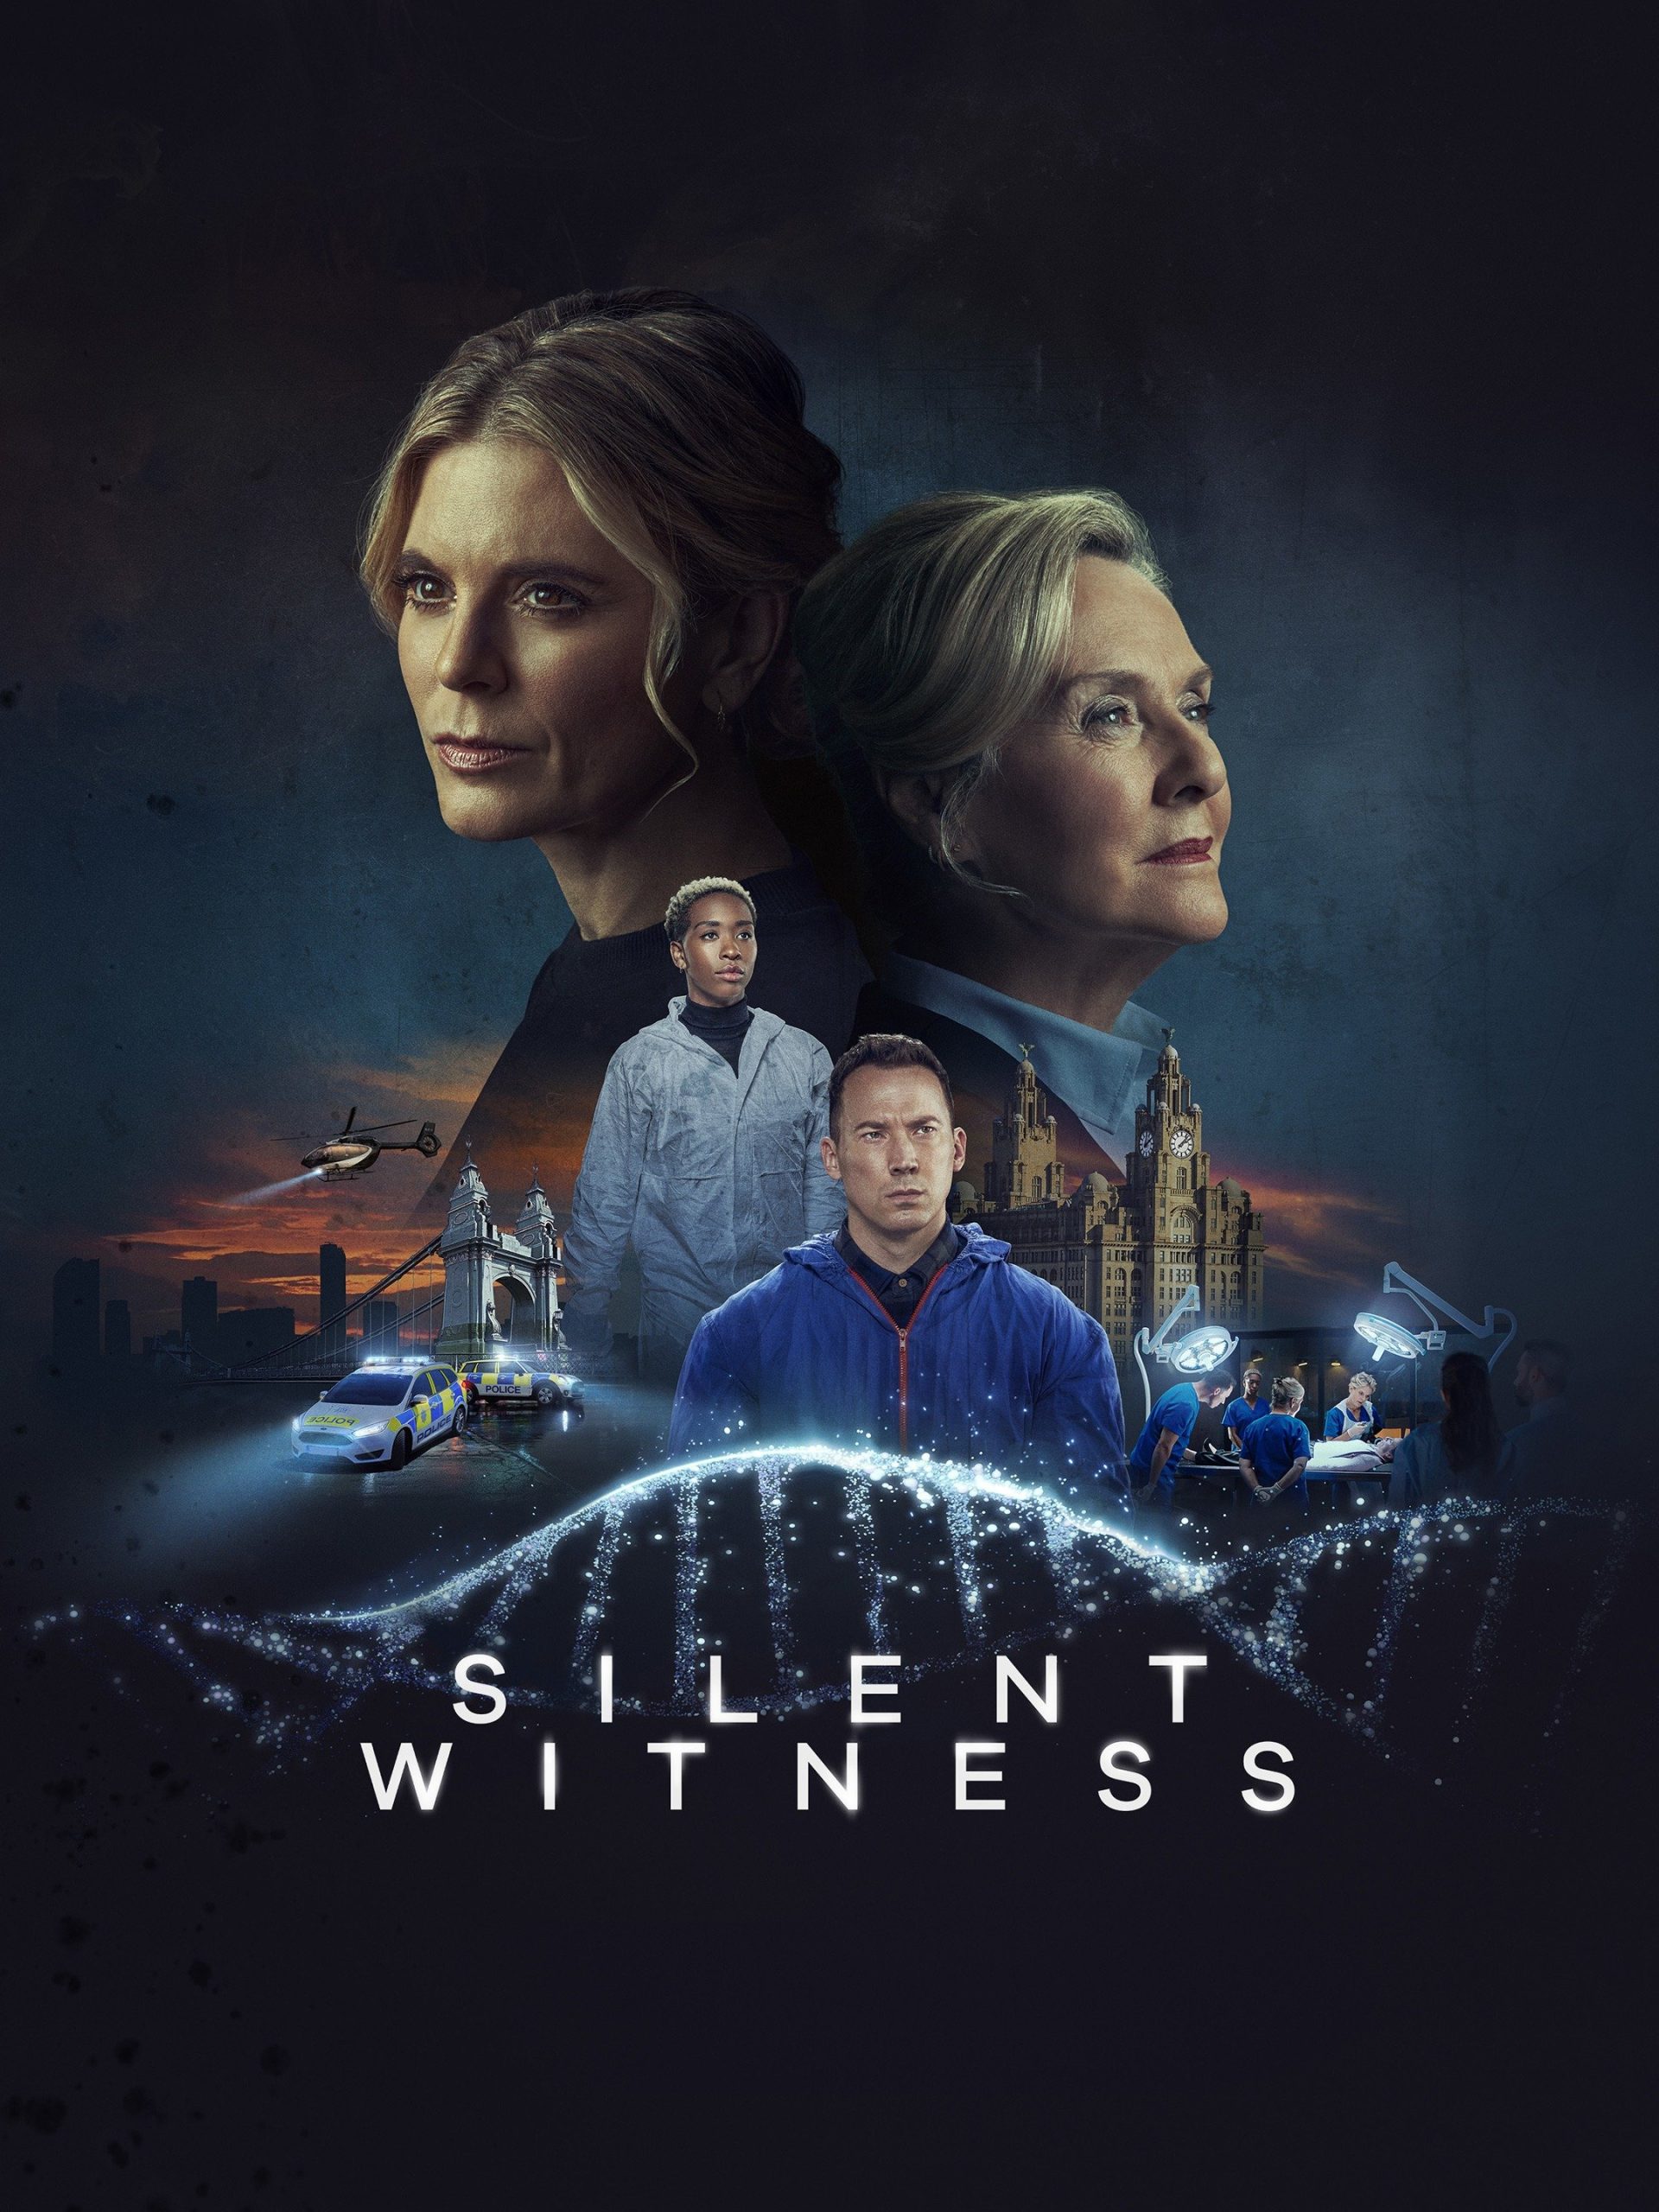 Silent Witness follows the lives of forensic pathologists and scientists.